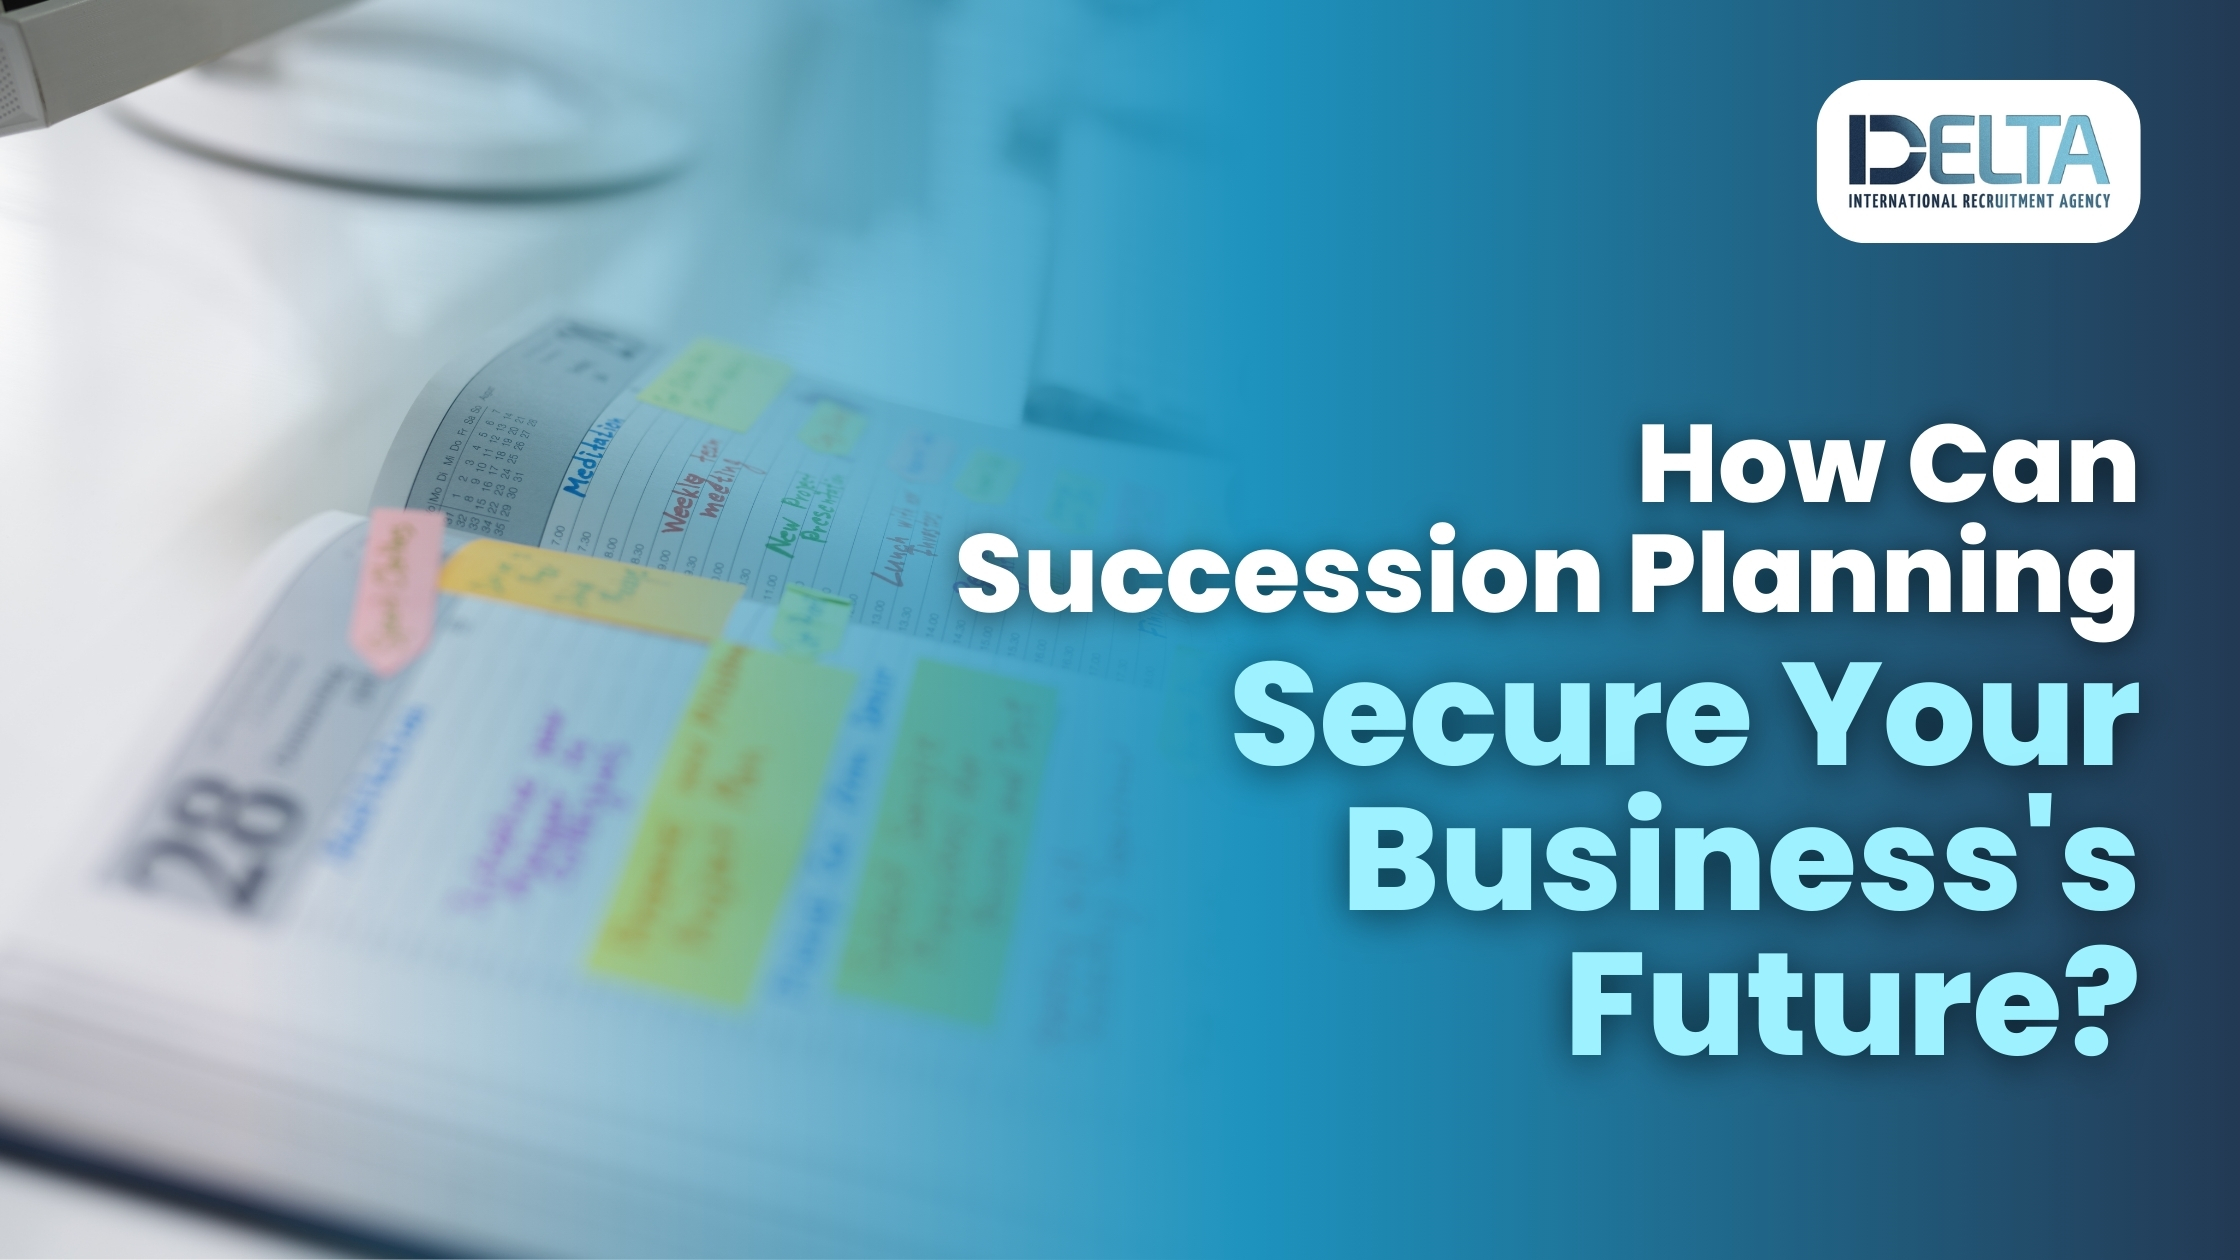 How Can Succession Planning Secure Your Business's Future?